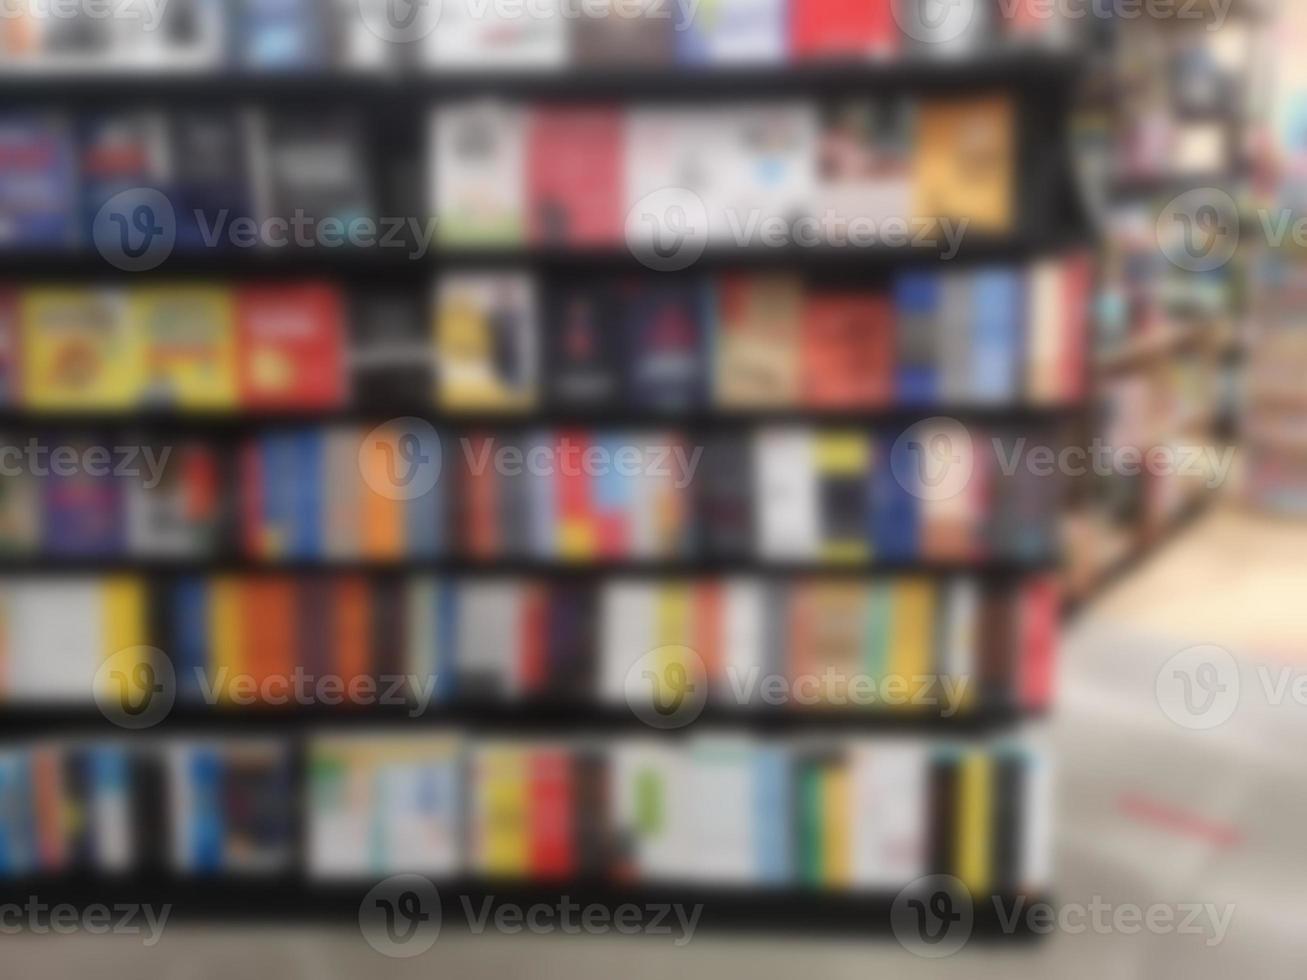 Blurred of Books arranged on shelves, bookshelf in the shop or library, background photo